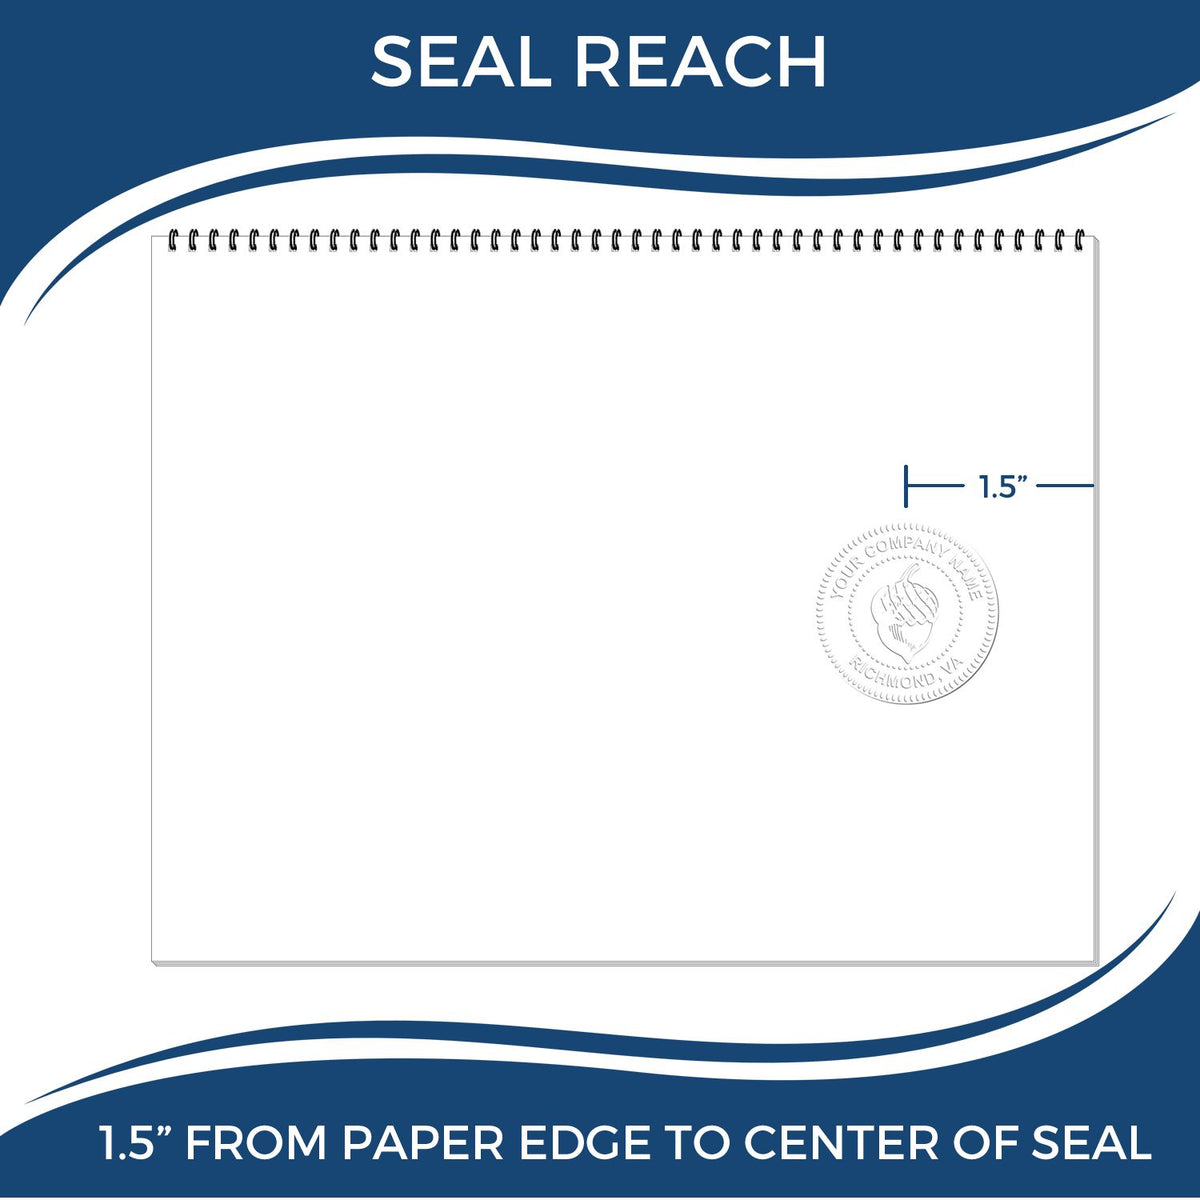 An infographic showing the seal reach which is represented by a ruler and a miniature seal image of the Soft Nebraska Professional Geologist Seal